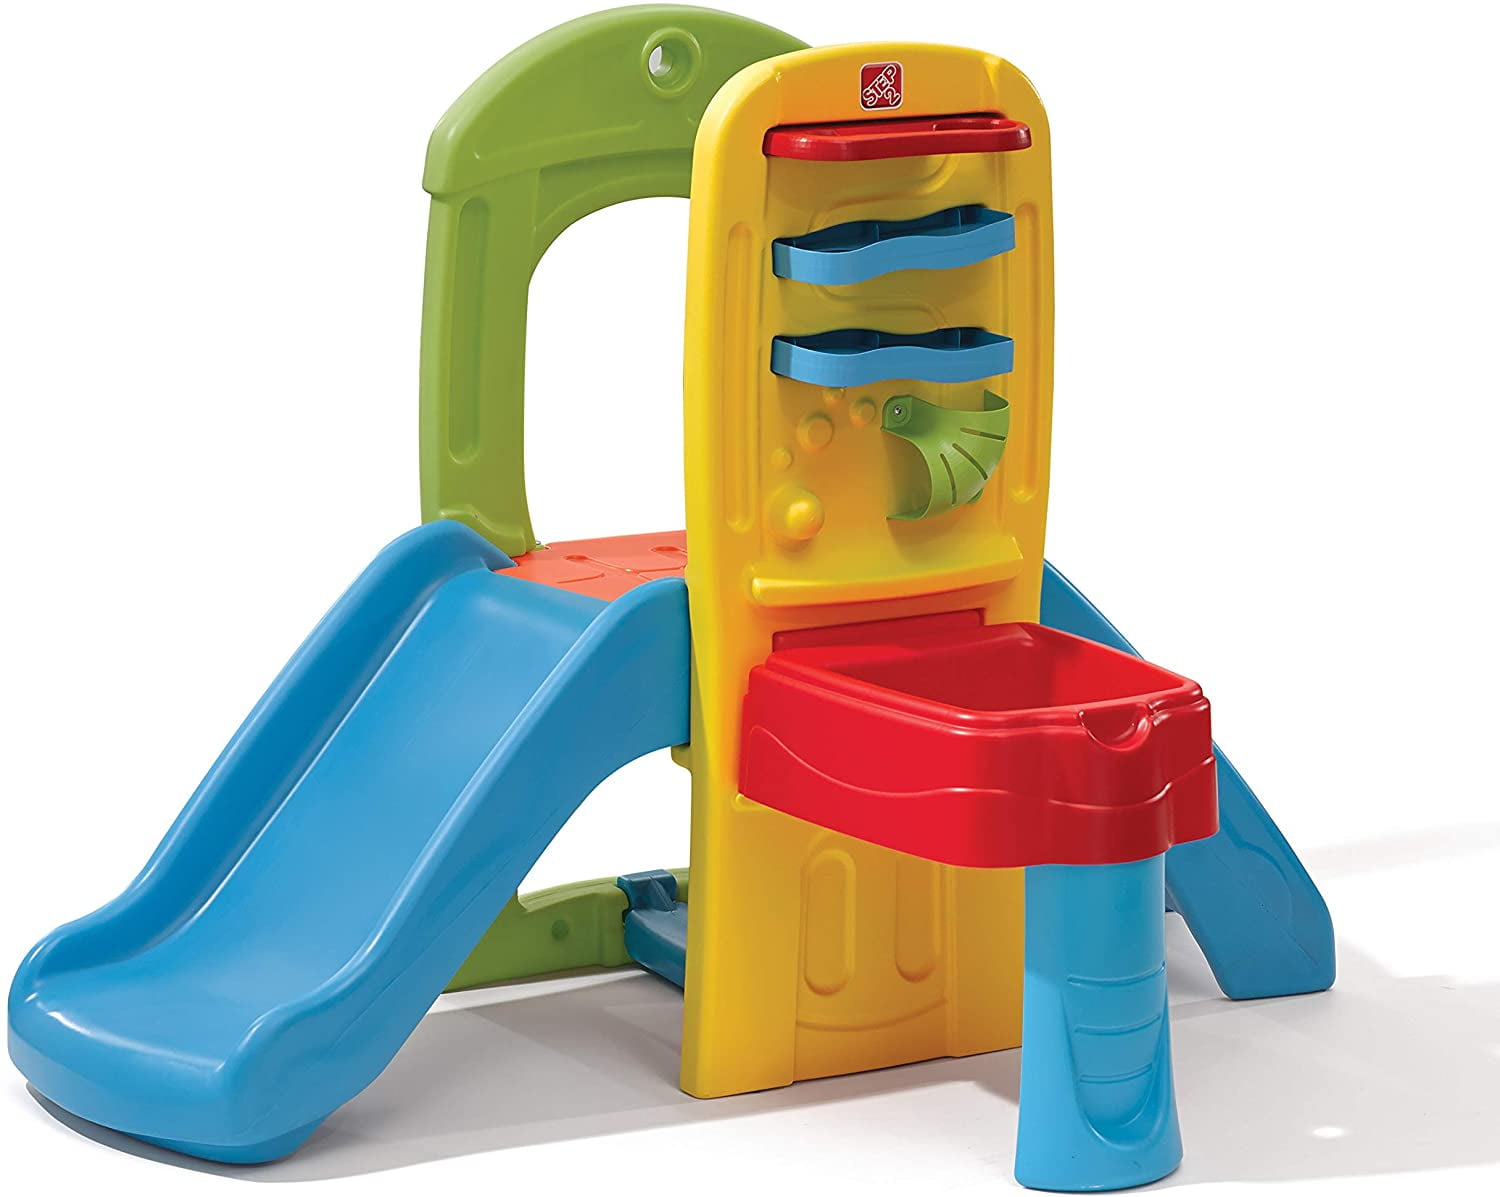 Details about   Foldable Childrens Kids Baby First Slide Indoor Outdoor Garden Climbing Play Toy 